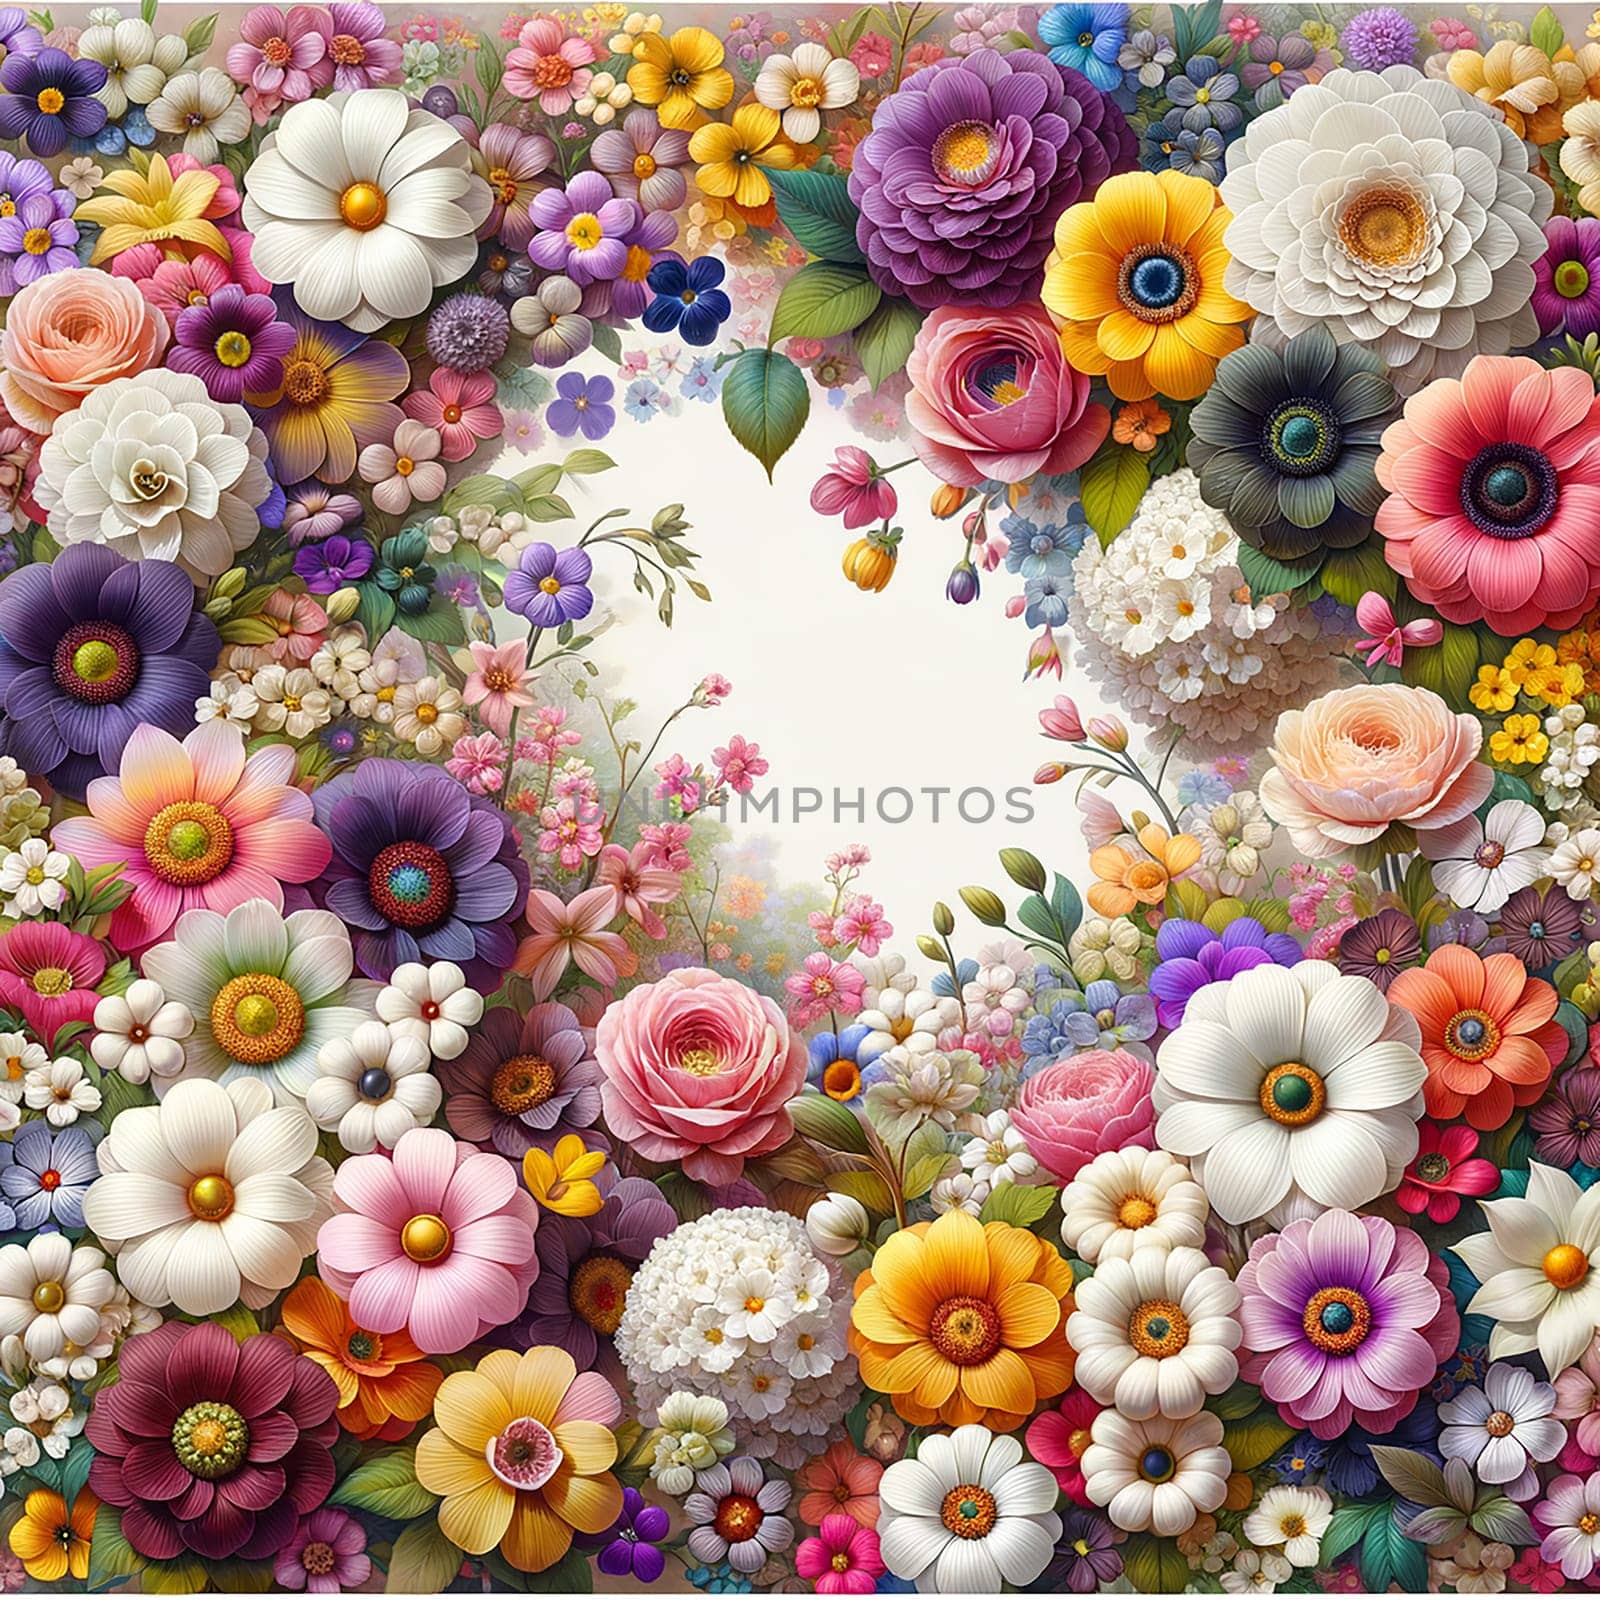 Blossoming Borders: Artistic Spring Flowers Frame